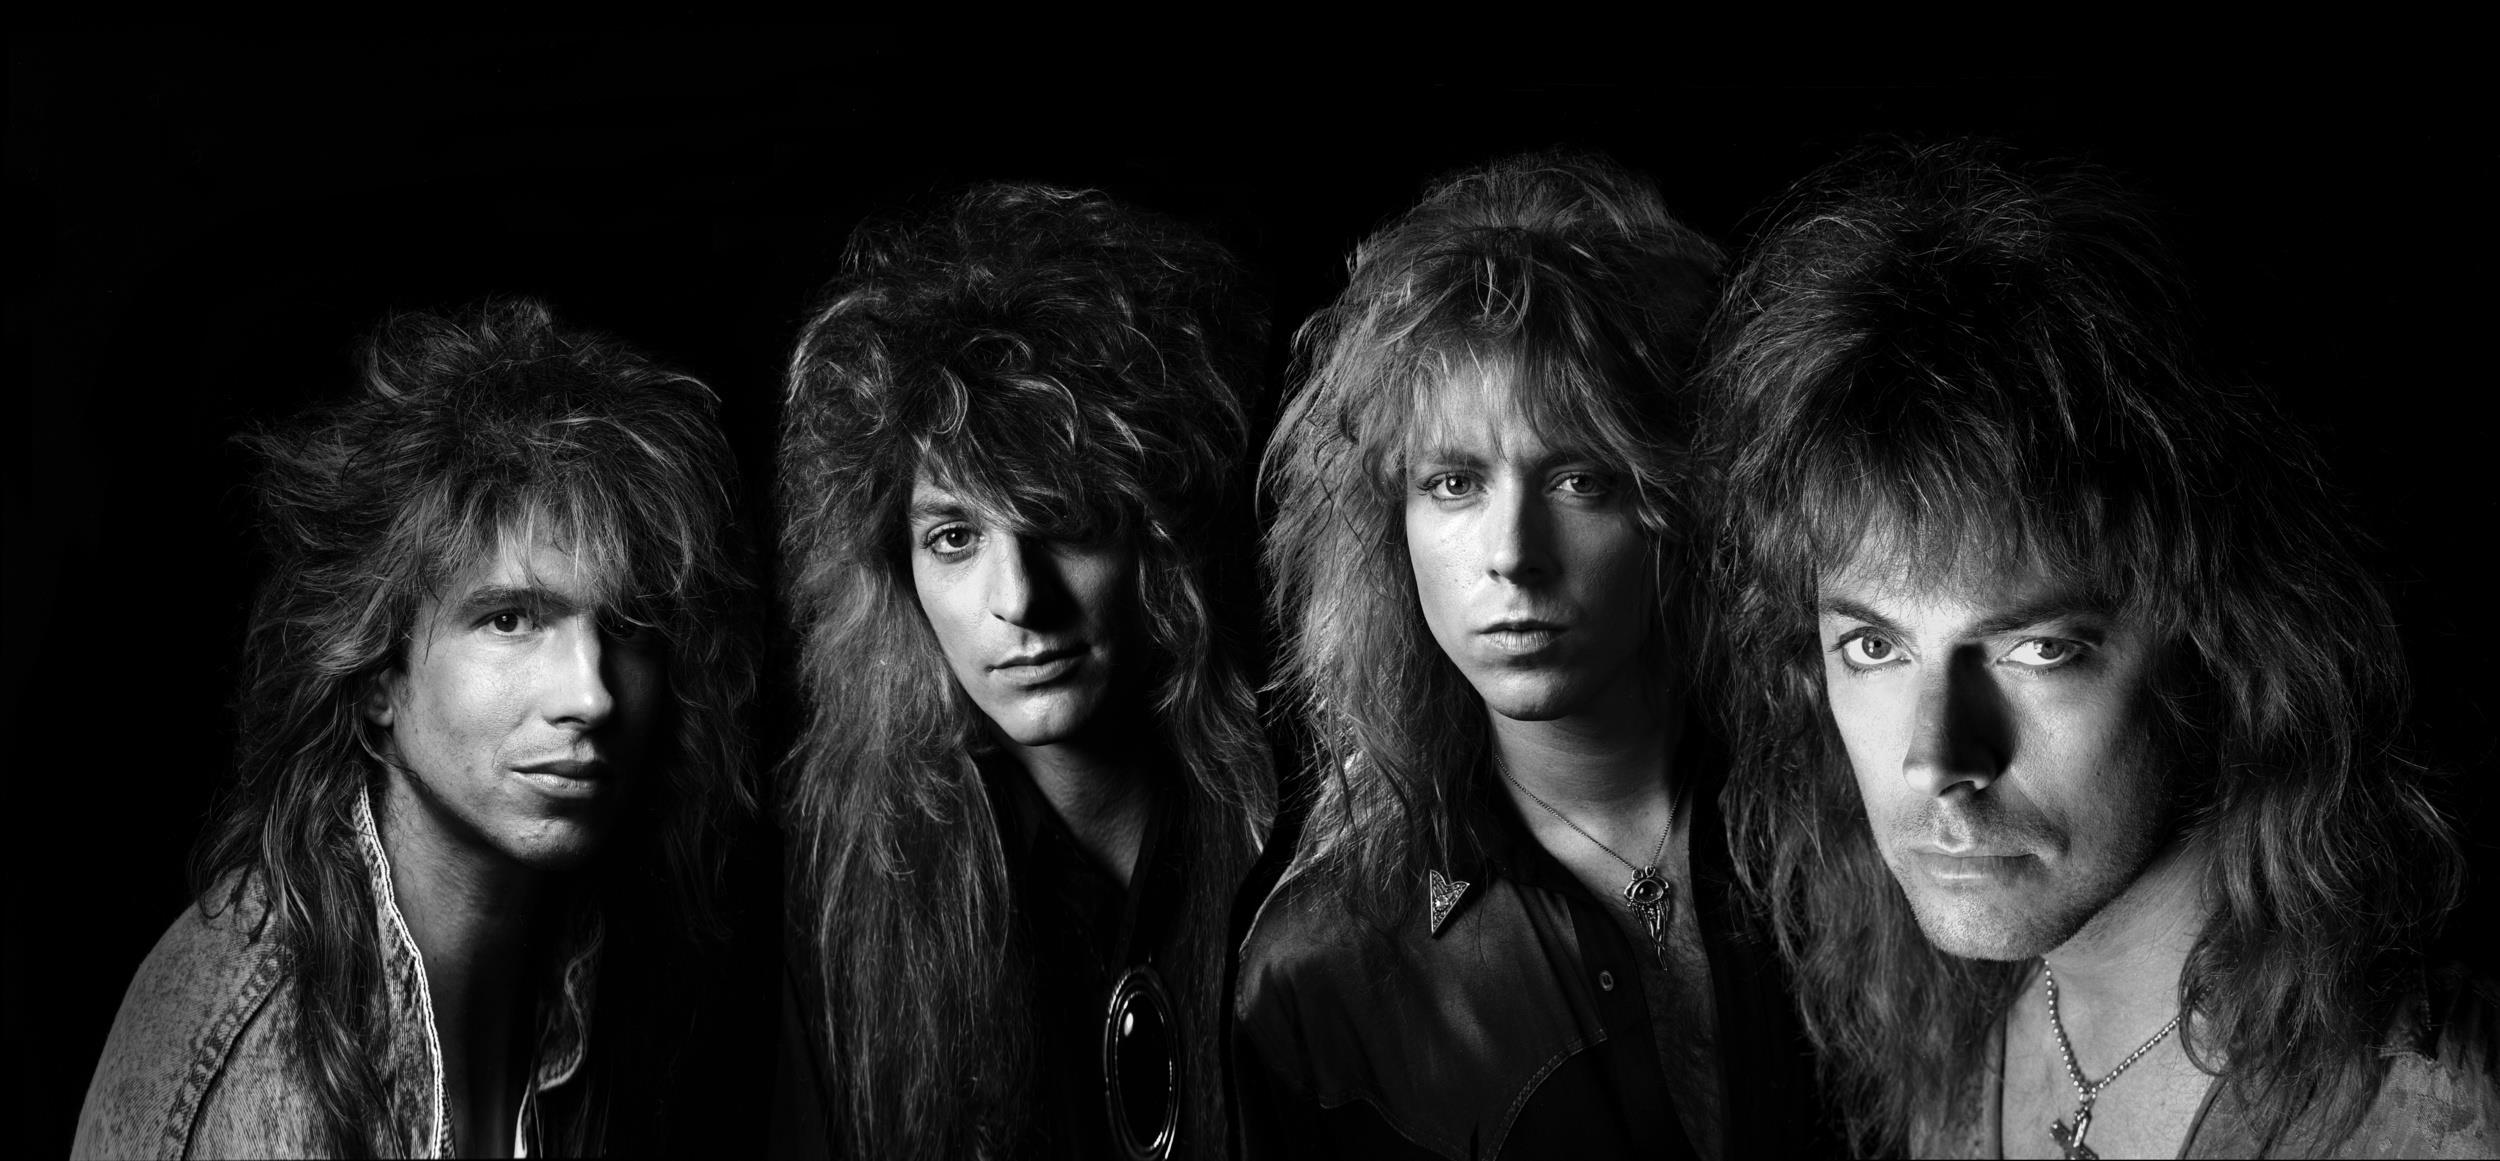 <p>Dokken probably should have been a bigger band within the hair metal genre than it was, mainly because guitarist George Lynch and bassist Jeff Pilson are actually good musicians. The band was even nominated for the Grammy for Best Metal Performance in 1989. Lynch doesn't necessarily consider Dokken a full-blown hair/glam metal band, but he certainly had the coif to fit in. Frontman Don Dokken still takes his version of the group on the road, playing hits like <a href="https://www.youtube.com/watch?v=PHgY53QXTyA" rel="noopener noreferrer">"Alone Again" </a>to those interested in listening.</p><p><a href='https://www.msn.com/en-us/community/channel/vid-cj9pqbr0vn9in2b6ddcd8sfgpfq6x6utp44fssrv6mc2gtybw0us'>Follow us on MSN to see more of our exclusive entertainment content.</a></p>